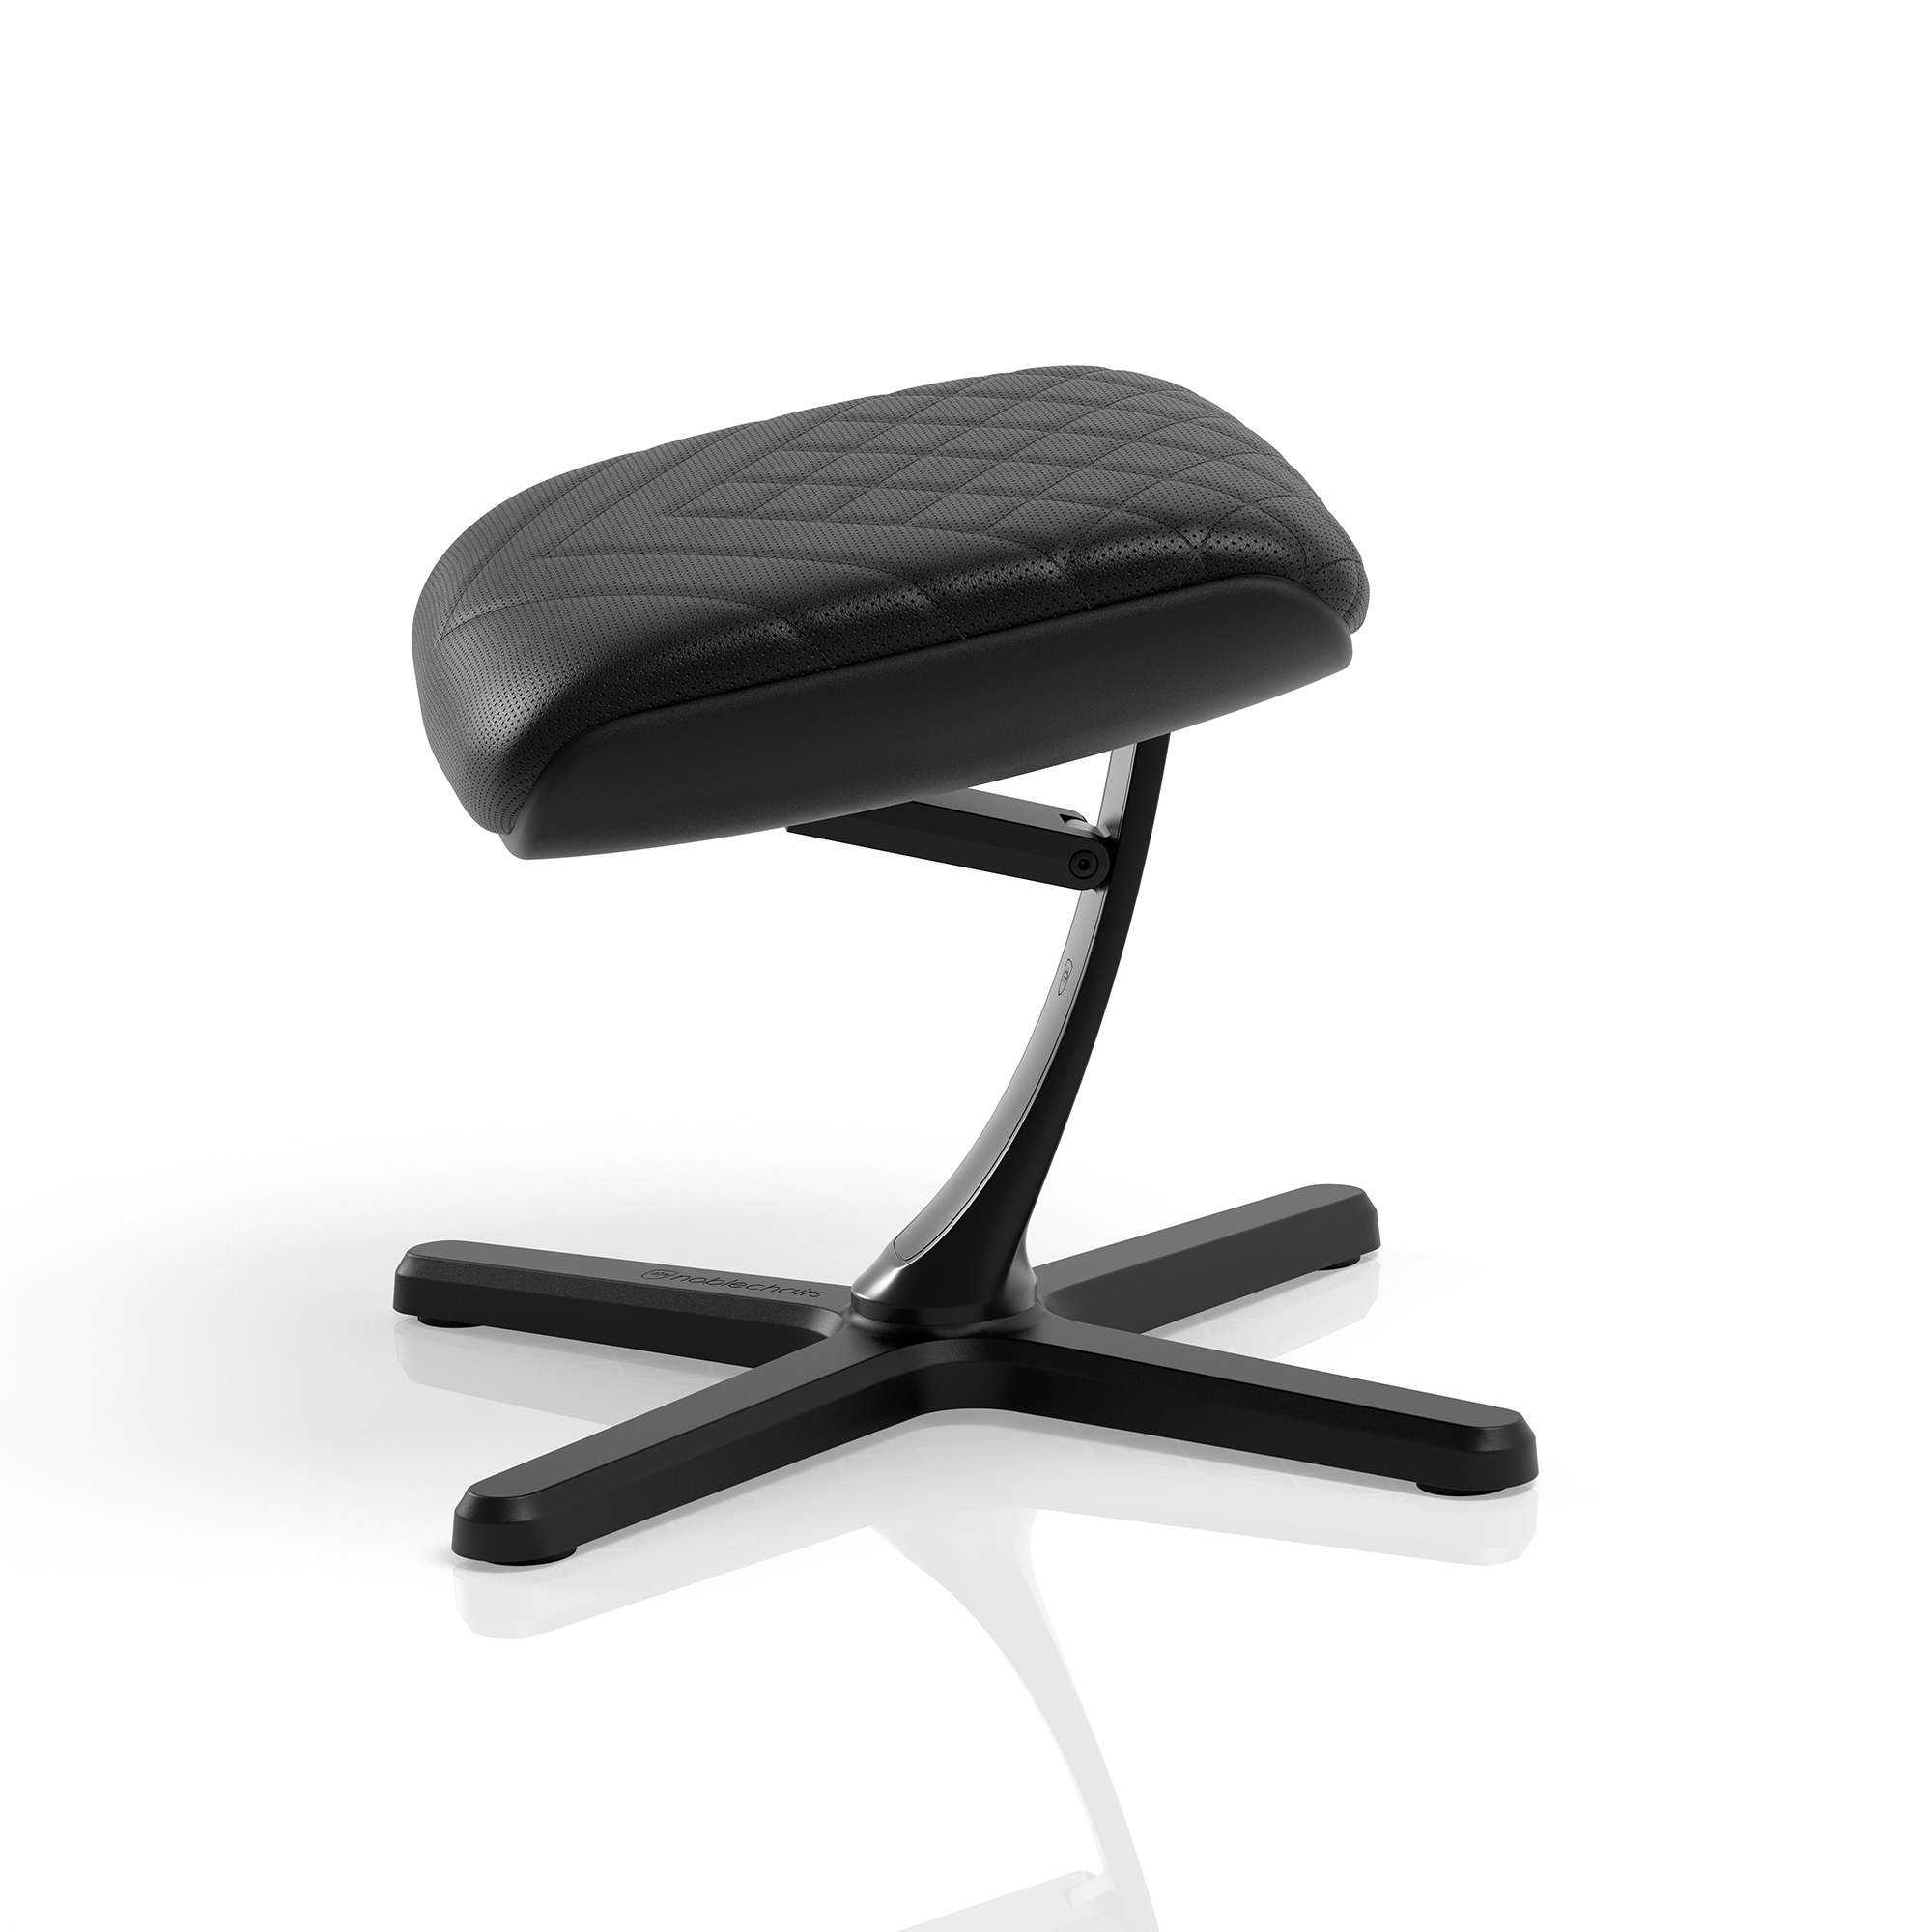 noblechairs - noblechairs Footrest 2 PU Edition Black